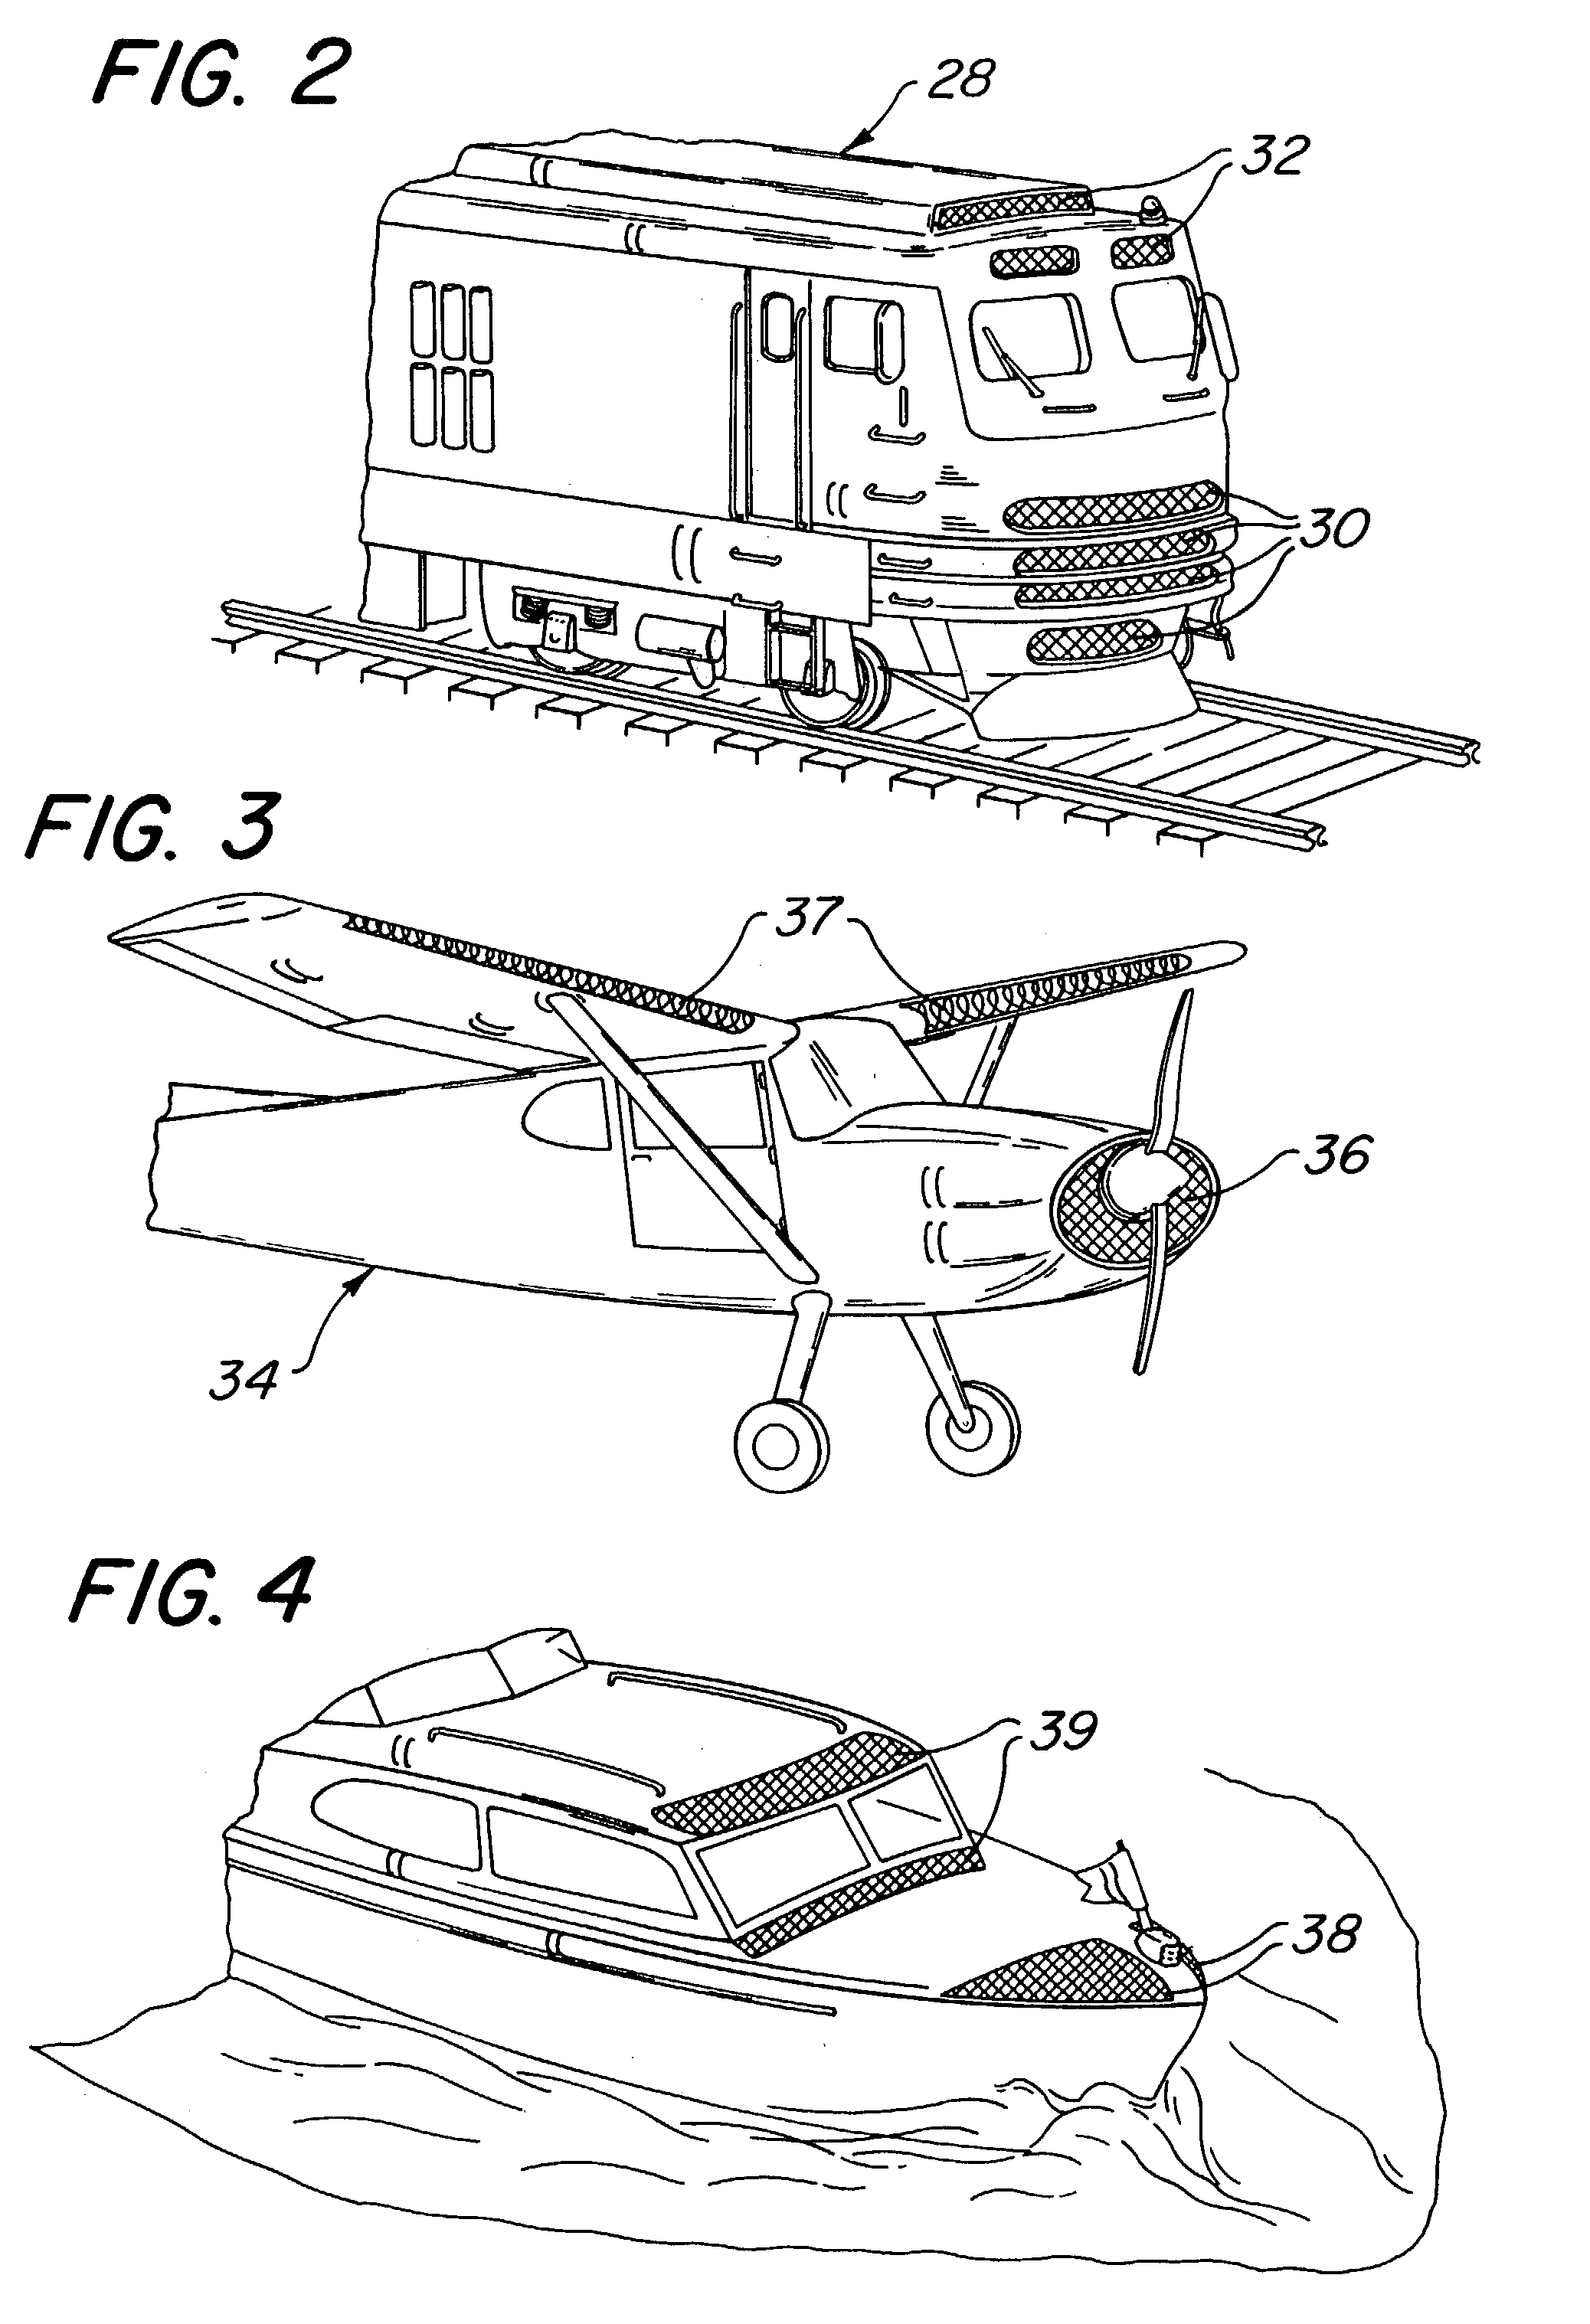 Airflow driven electrical generator for a moving vehicle